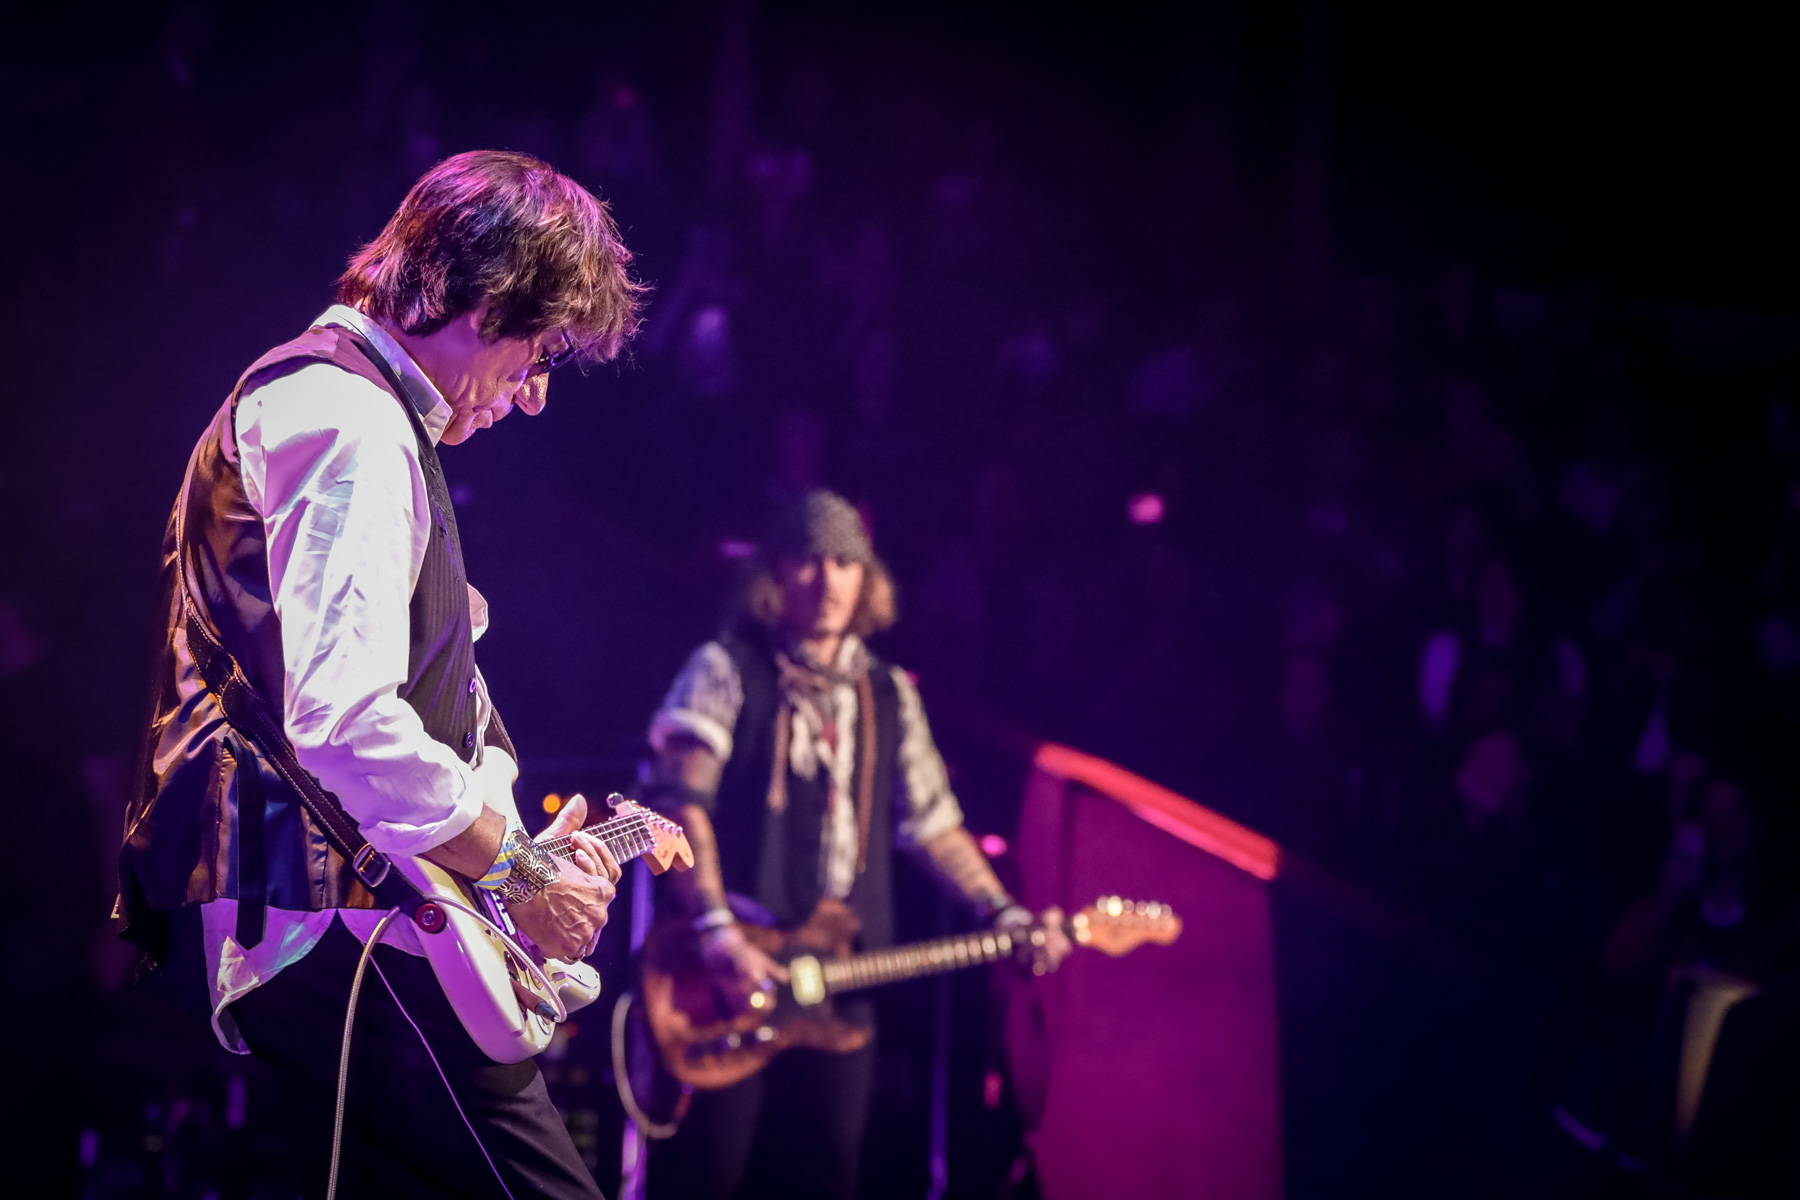 Jeff Beck and Johnny Depp at the Royal Albert Hall by Christie Goodwin